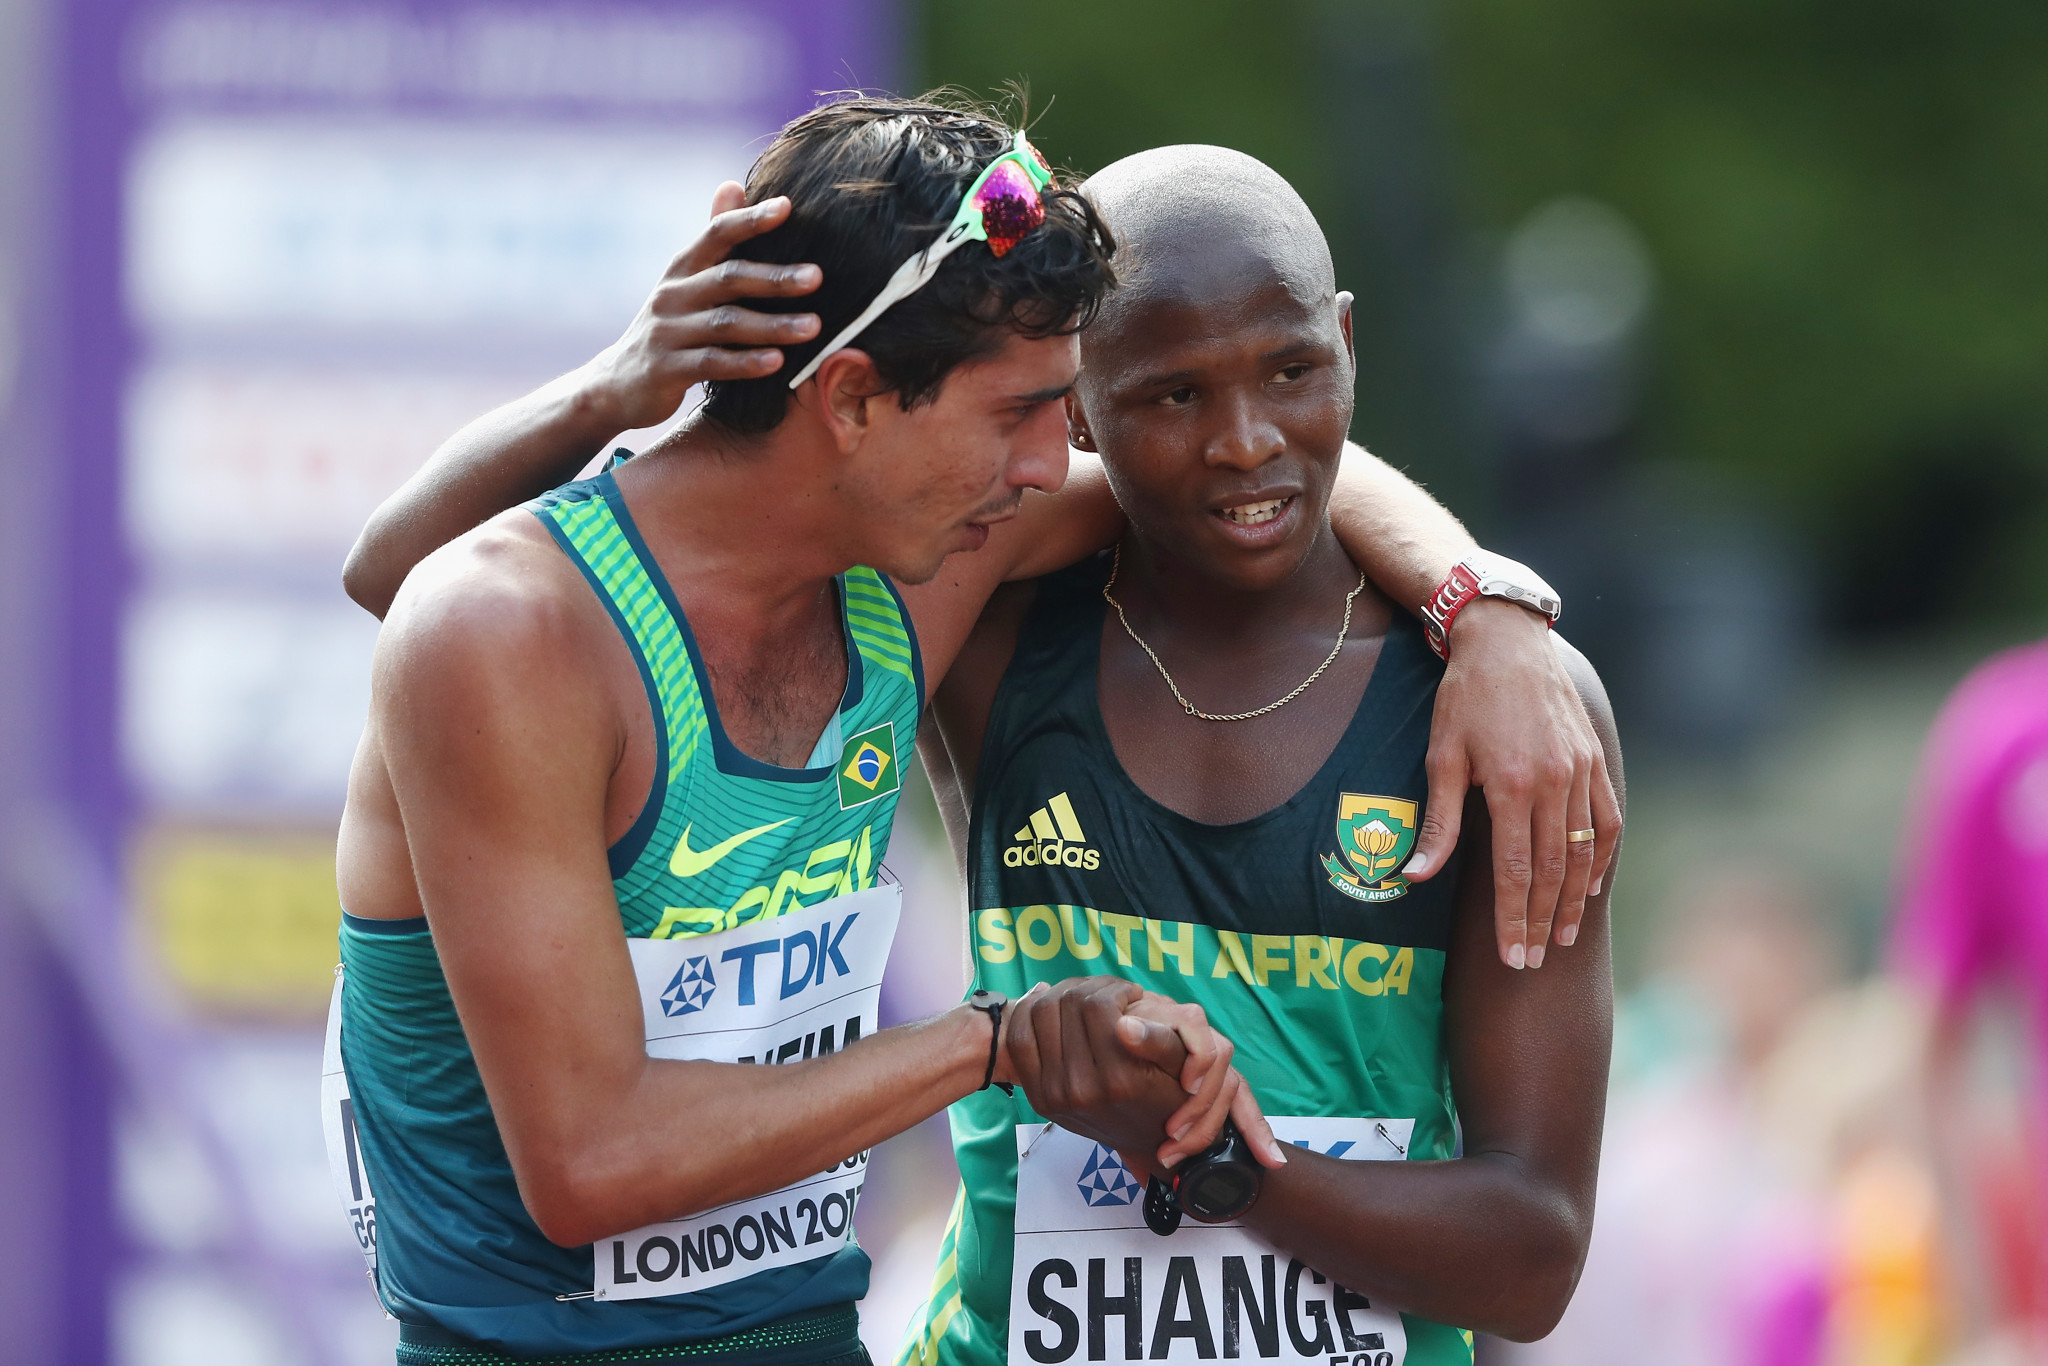 Lebogang Shange is consoled after he narrowly missed a medal at the 2017 IAAF World Championships in London, finishing fourth in the 20km race walk ©Getty Images